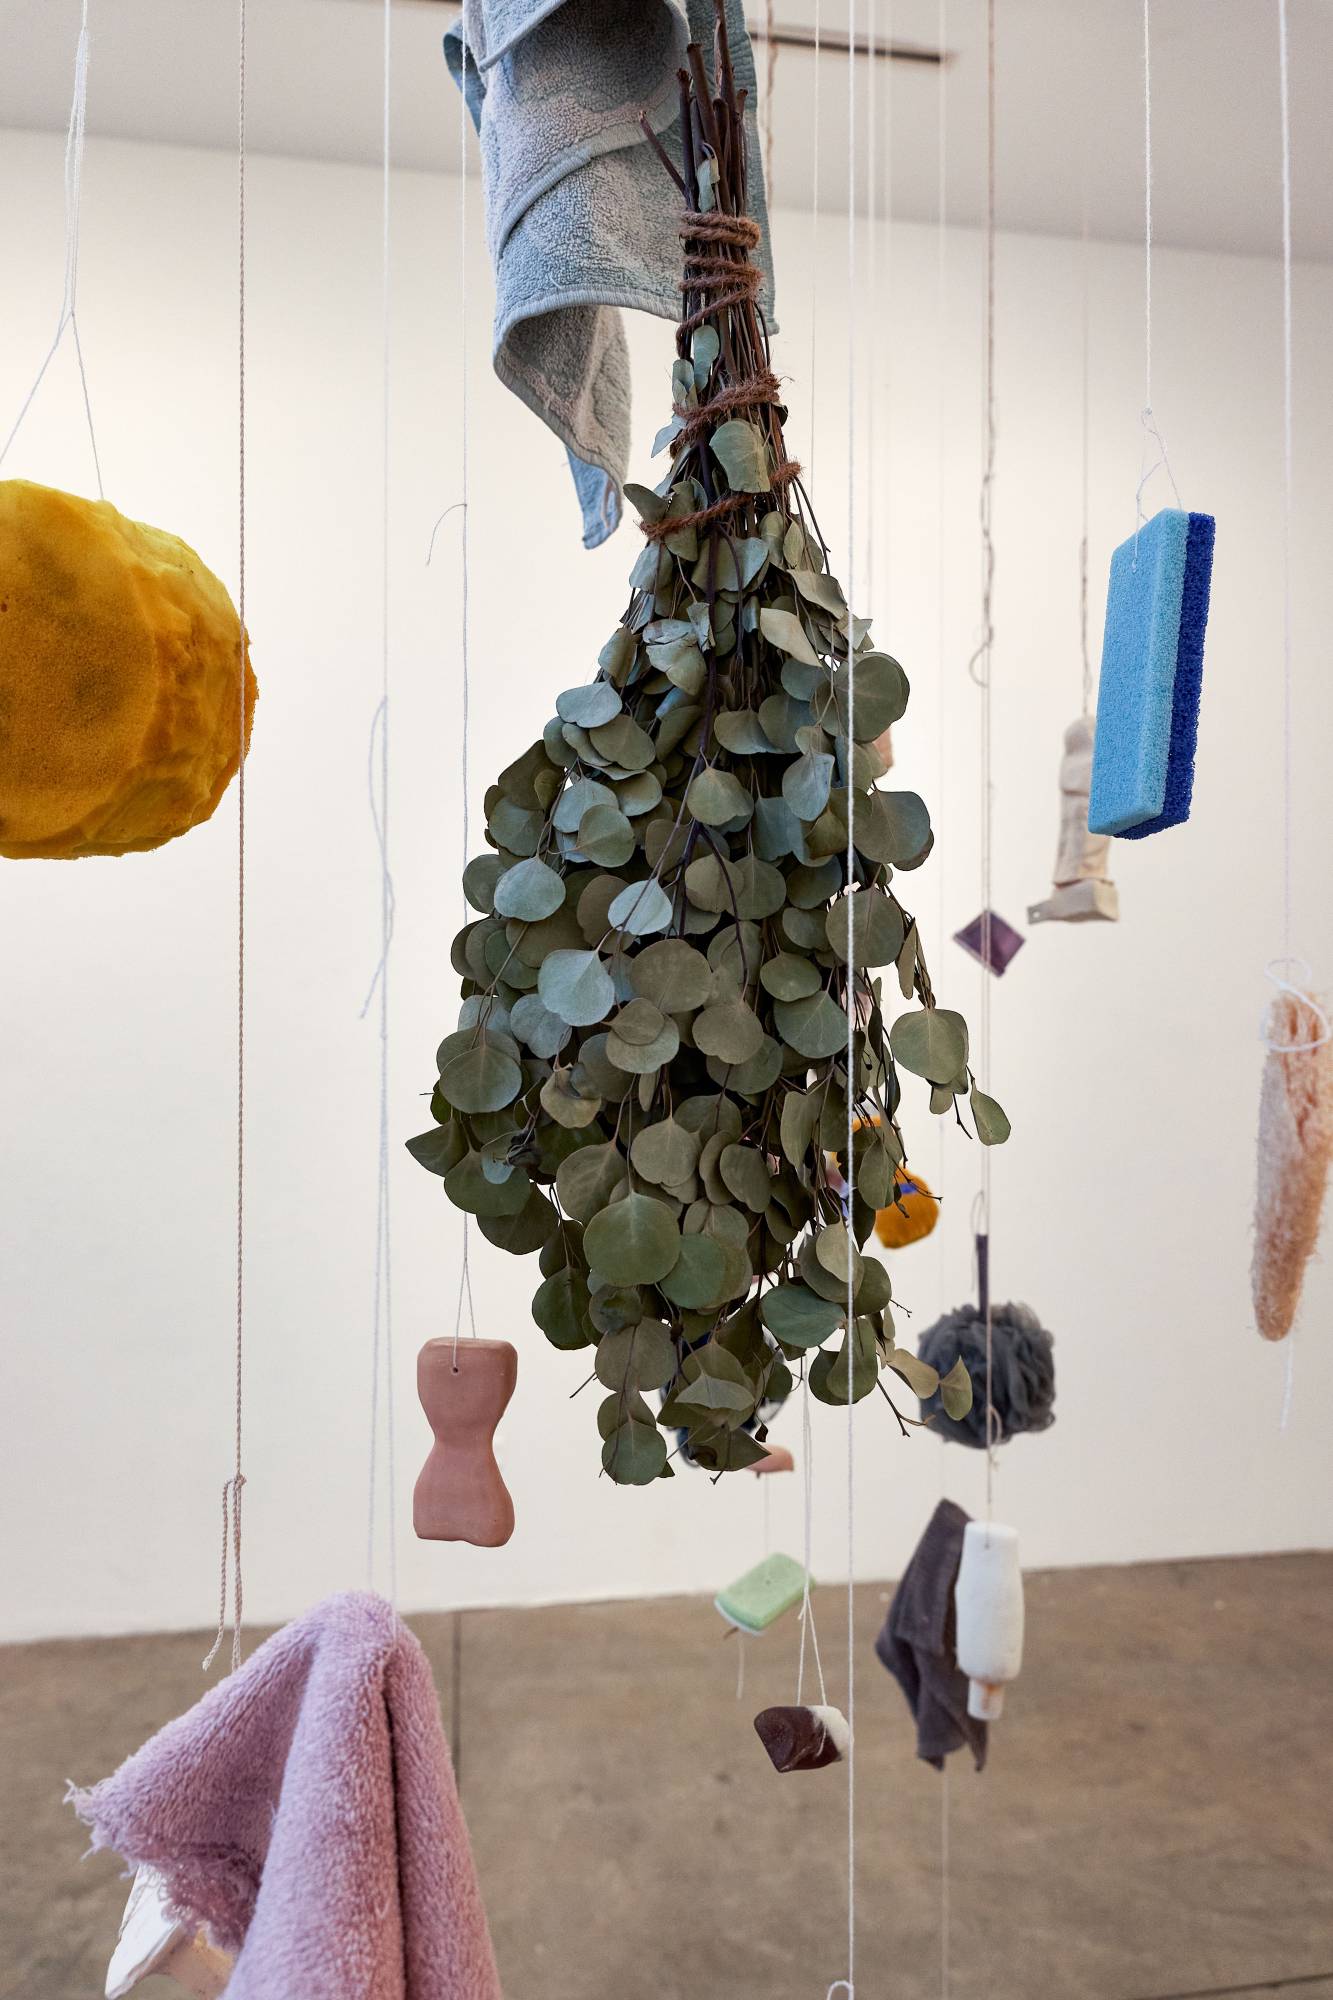 Leo Alas: Community Archive, 2022, size variable. resin, ceramic, eucalyptus, foam, and found objects